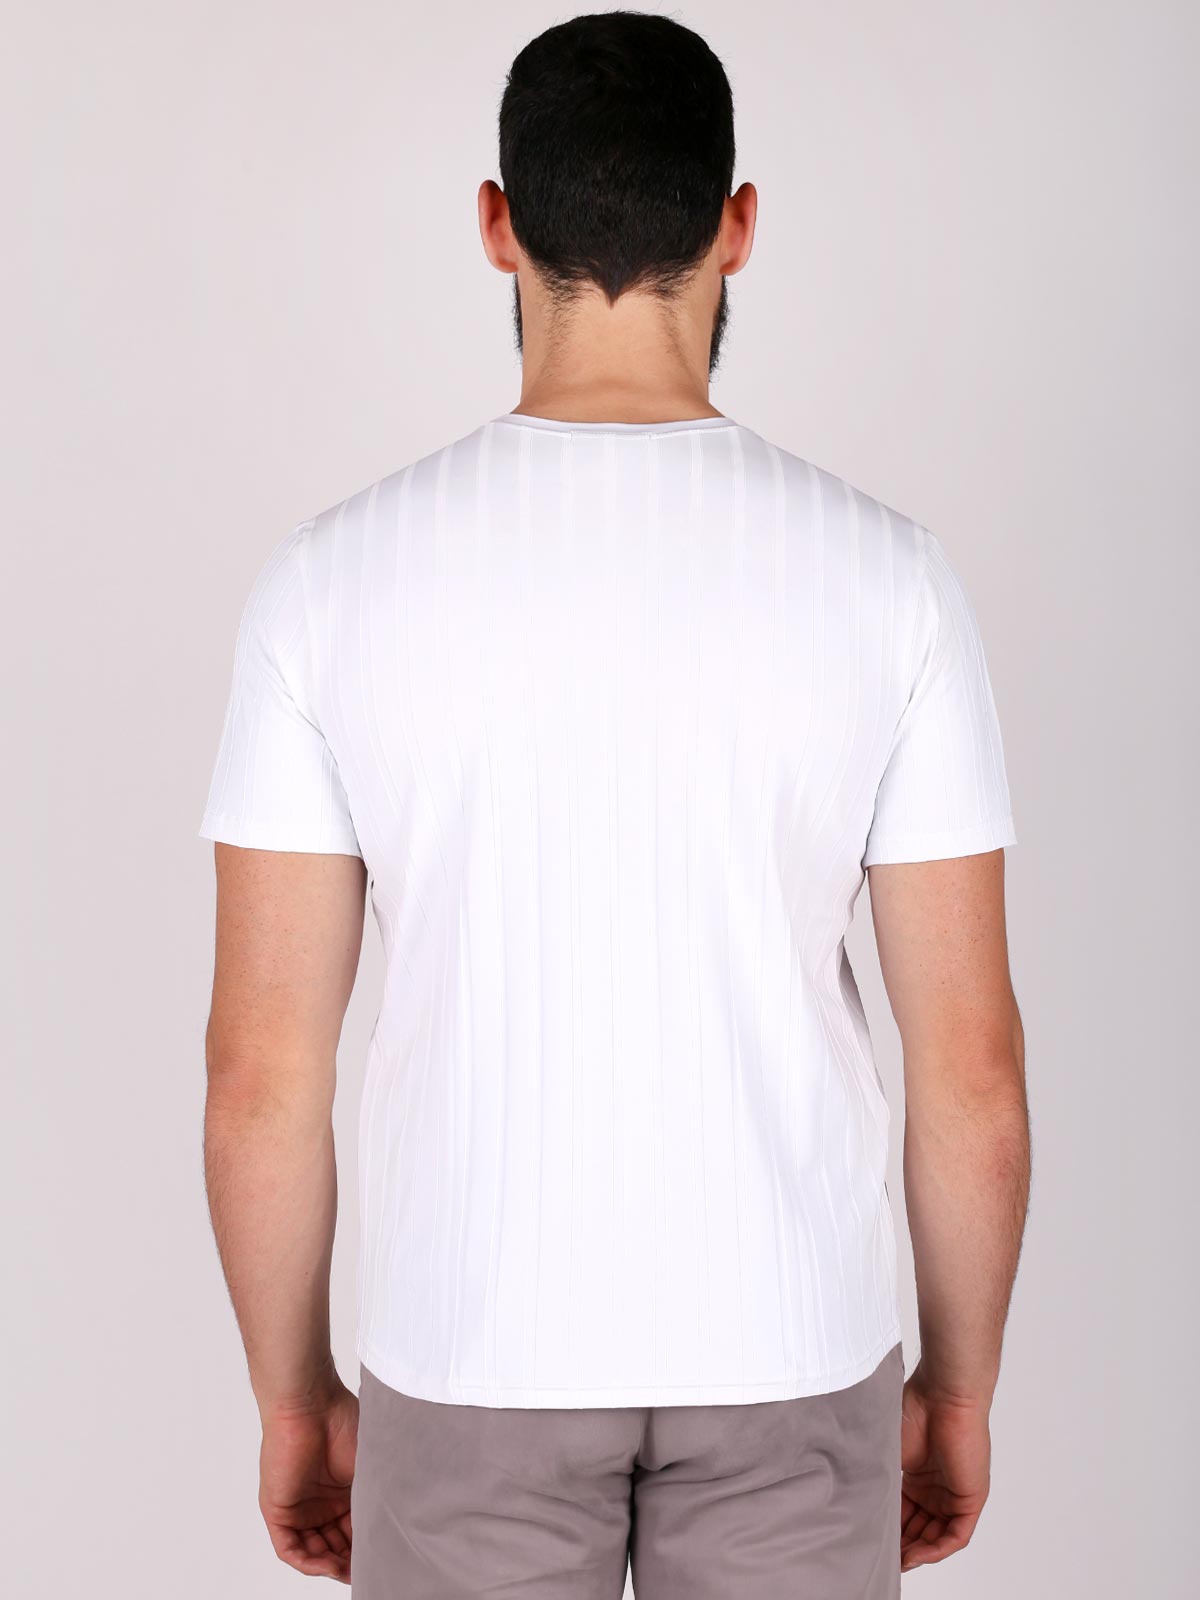  tshirt in white with embossed stripe  - 88004 € 6.75 img2